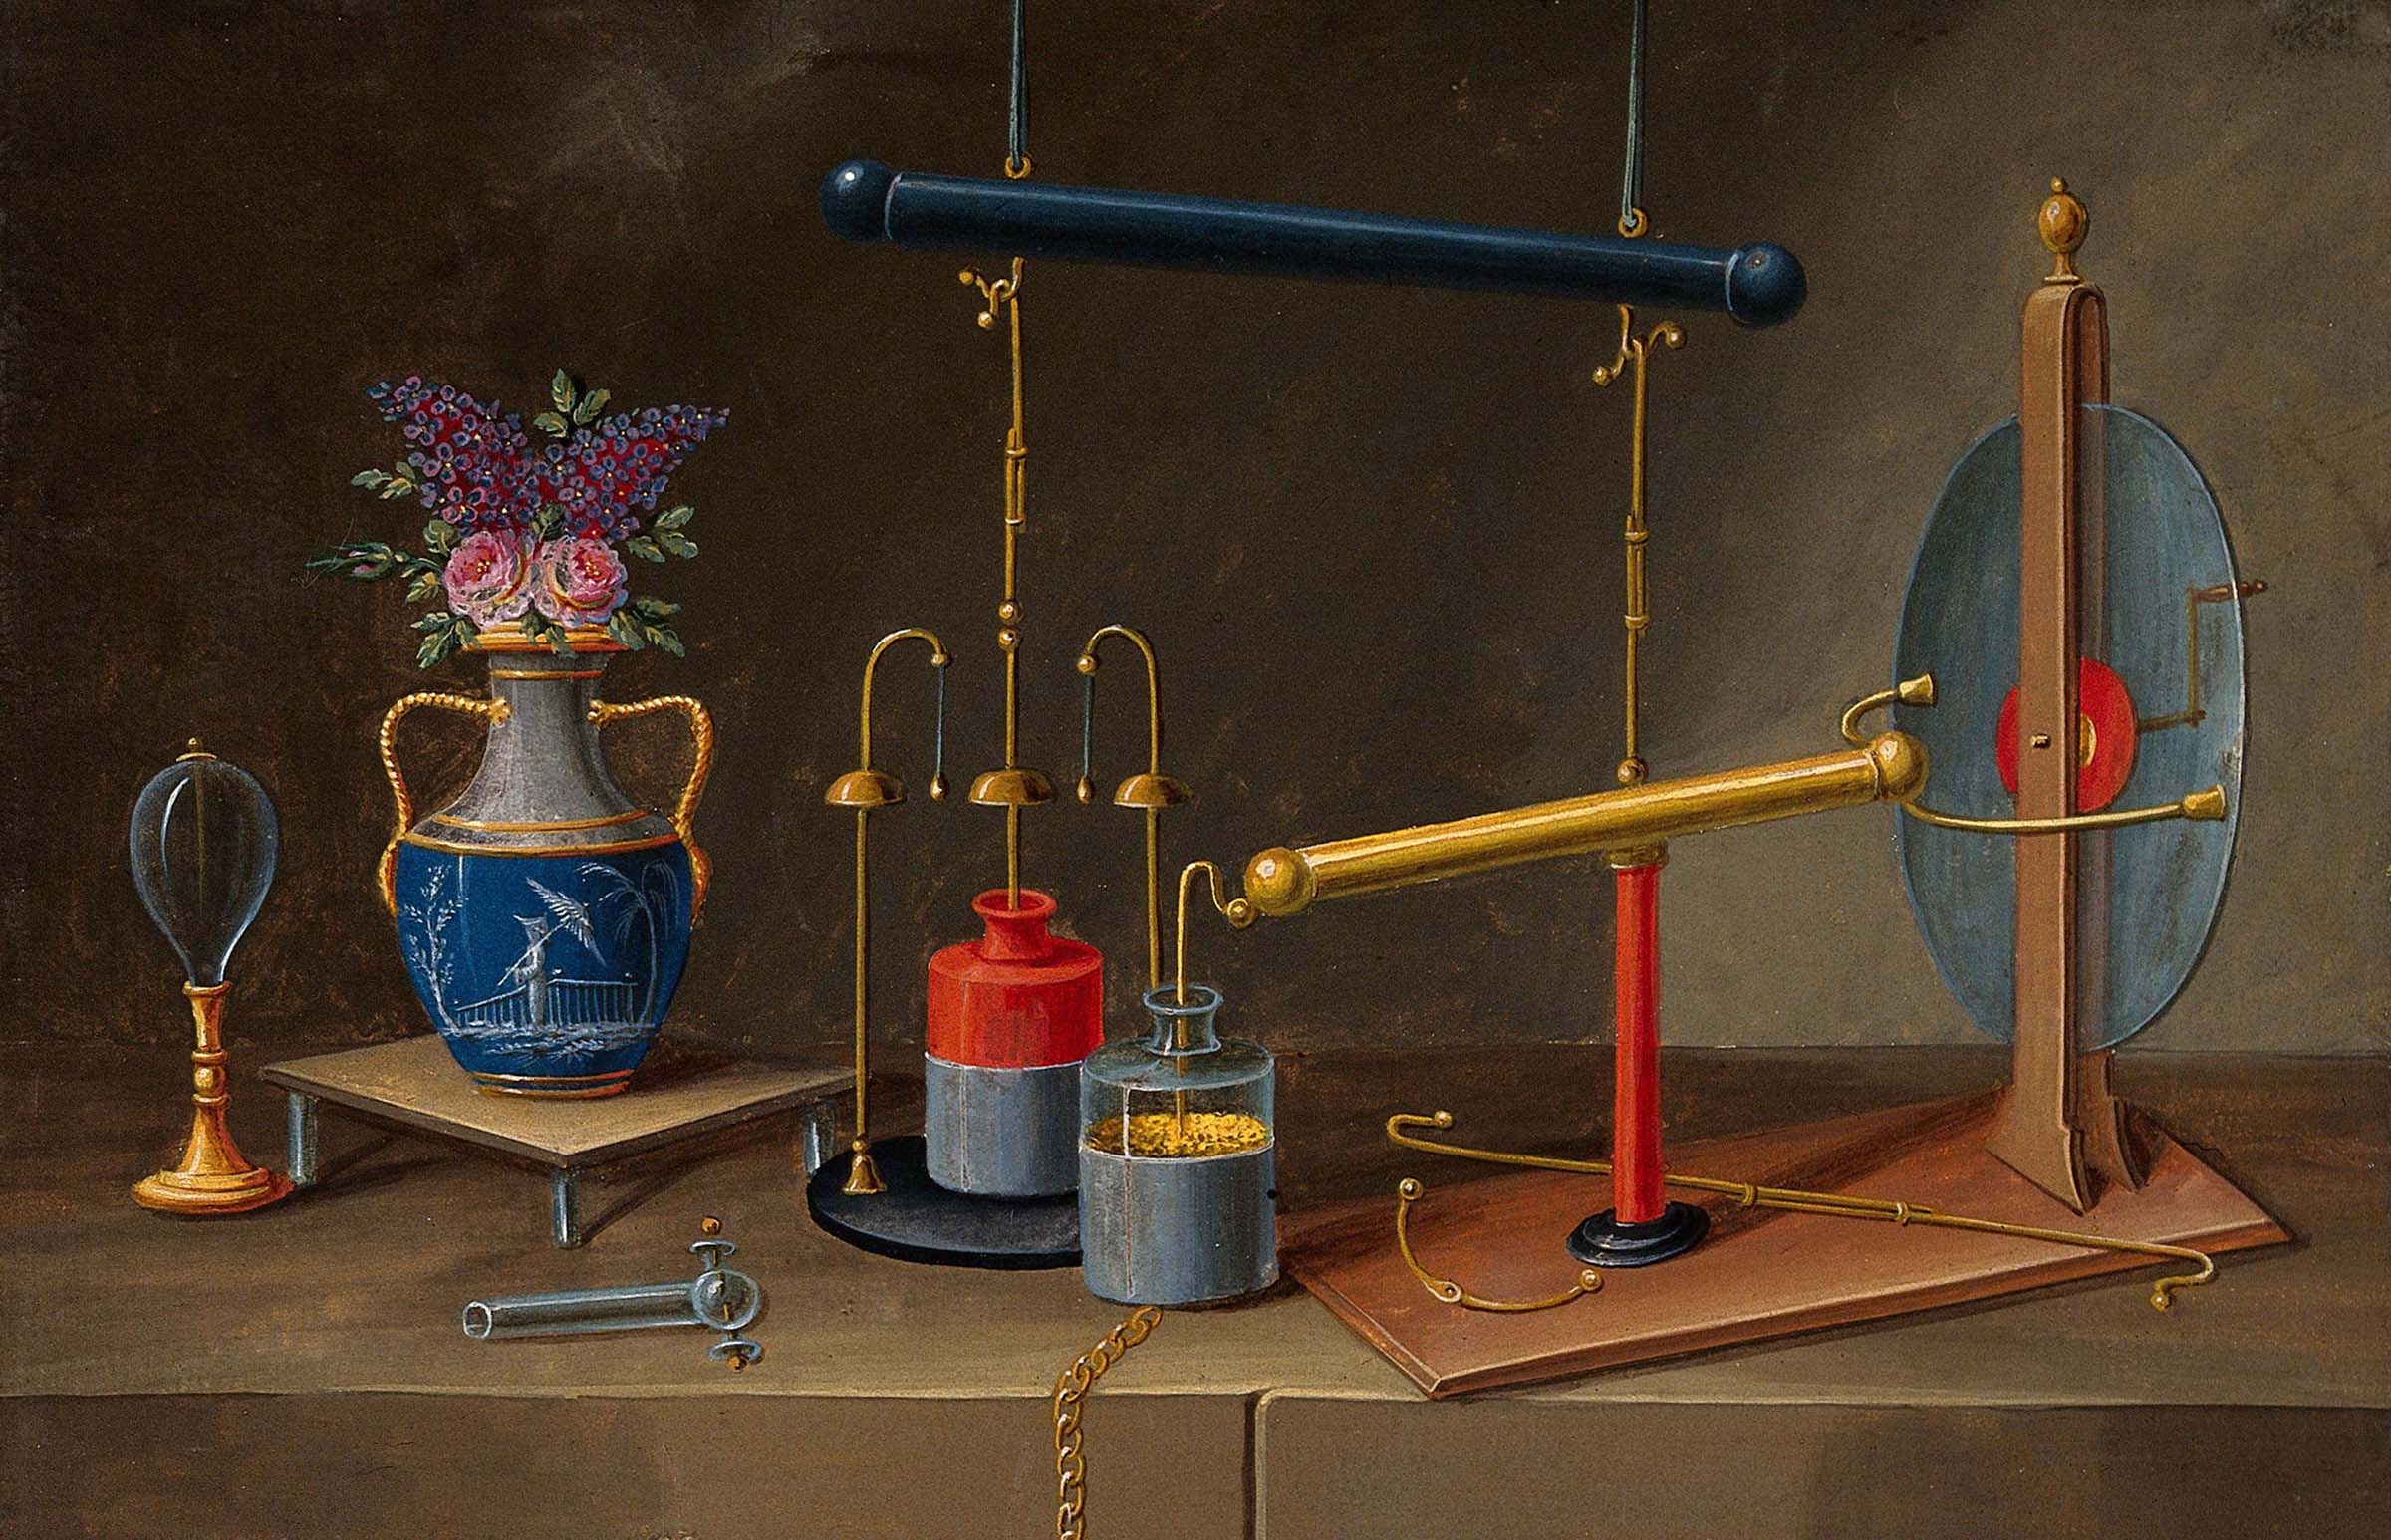 Electricity: condenser jars, an electro-static generator, and a vase with flowers, c. 1800.